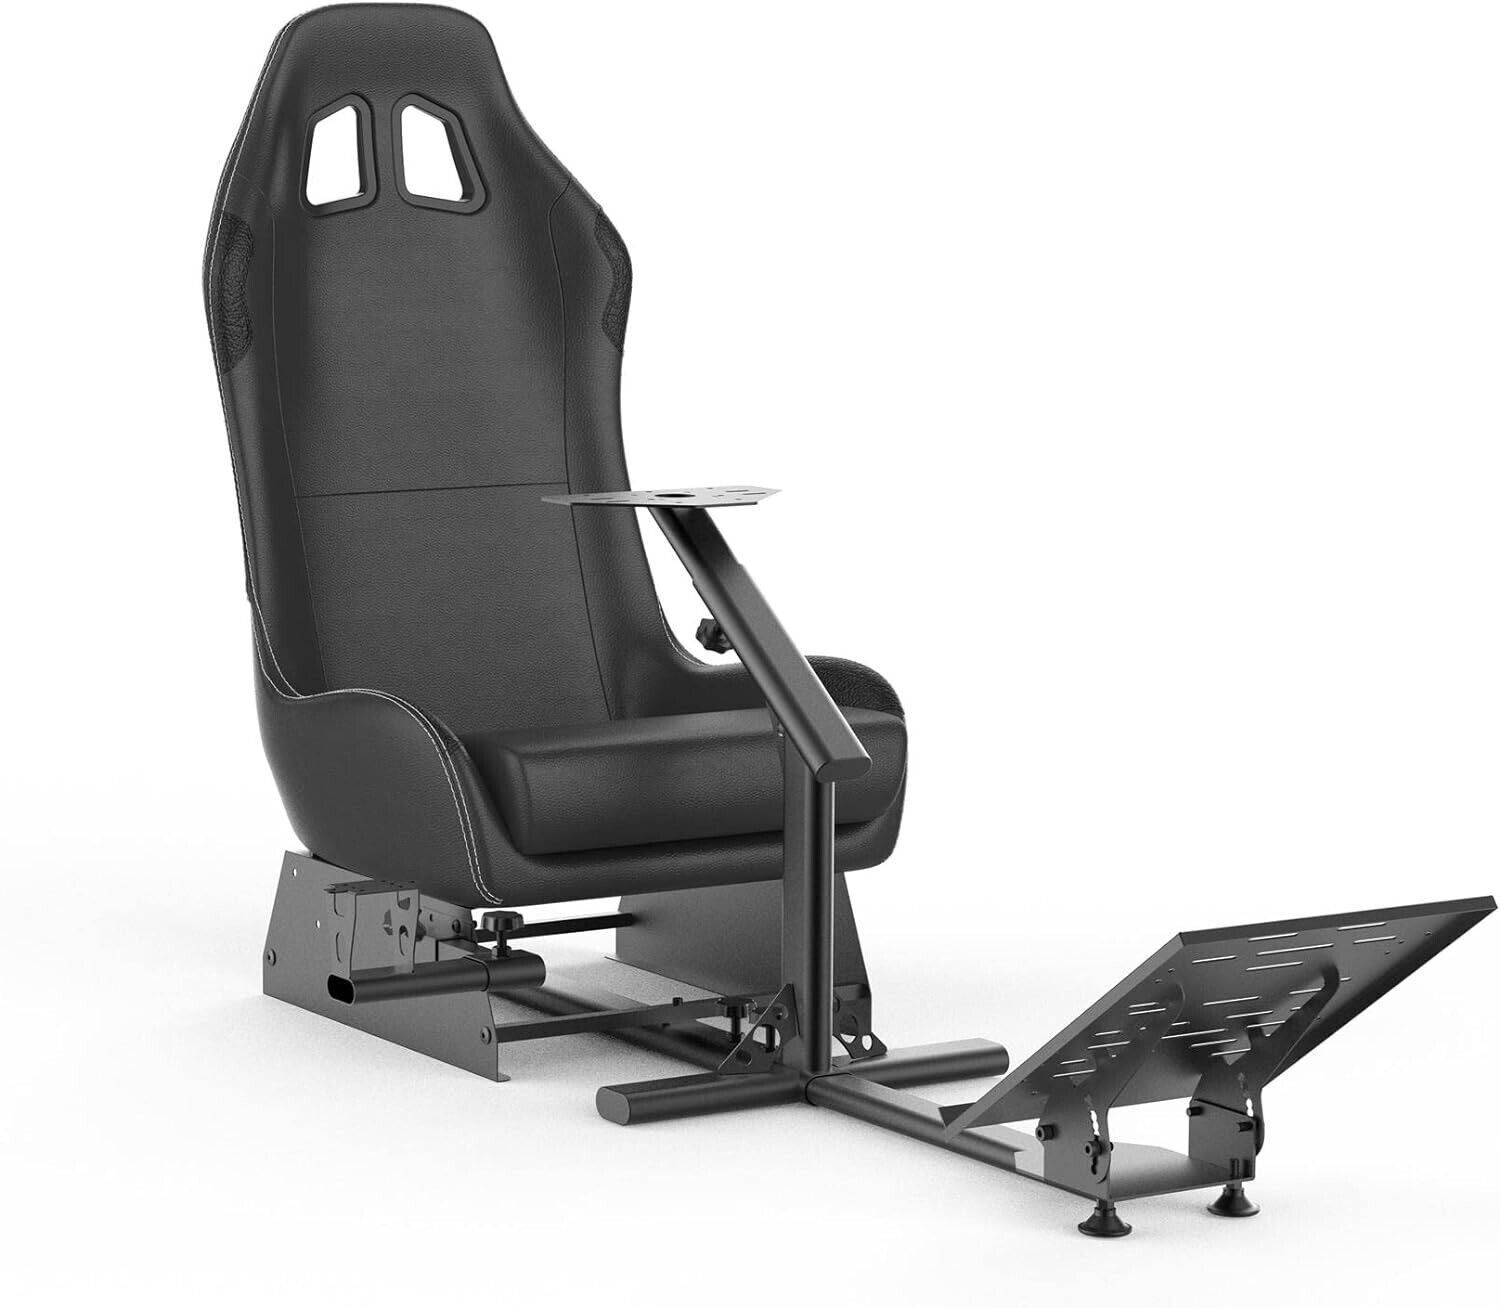 CR Driving Game Sim Racing Frame Rig & Seat - Wheel Pedals Xbox PS PC Console F1